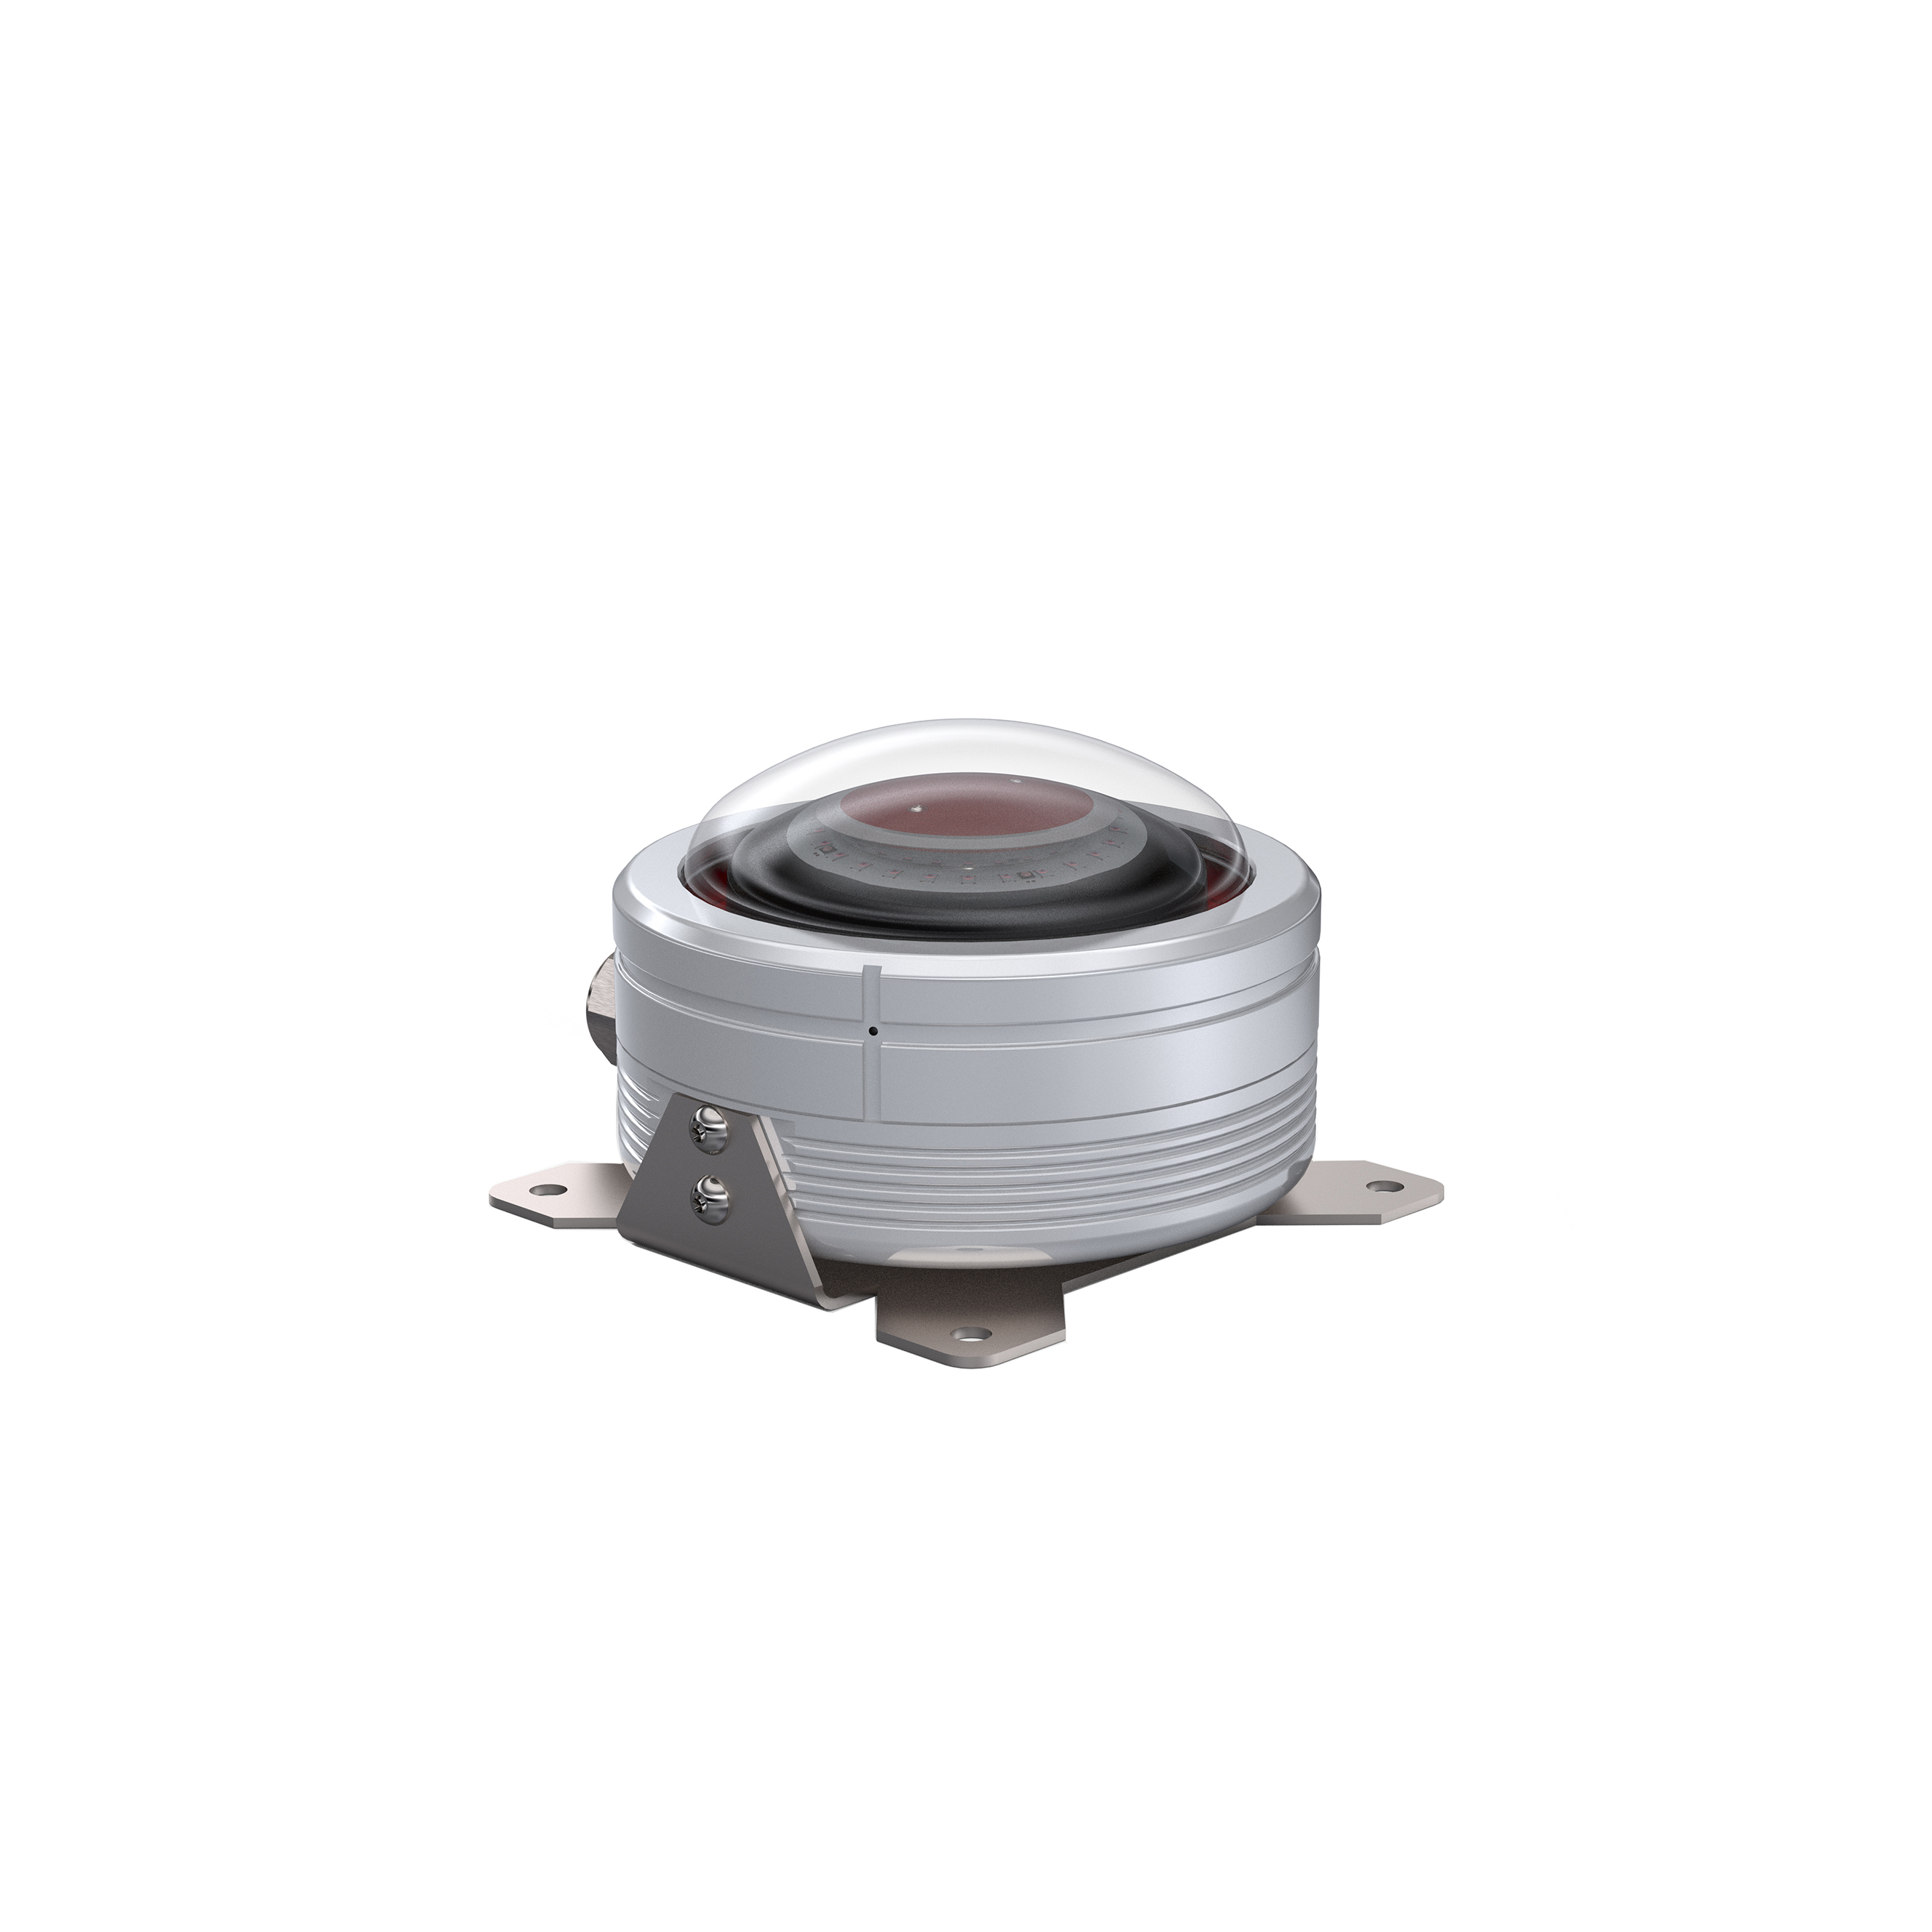 TEF 9980 Helideck Status Light - Repeater Light - LOW PROFILE 24VDC, EX, IP 66/67, incl. 3m cable